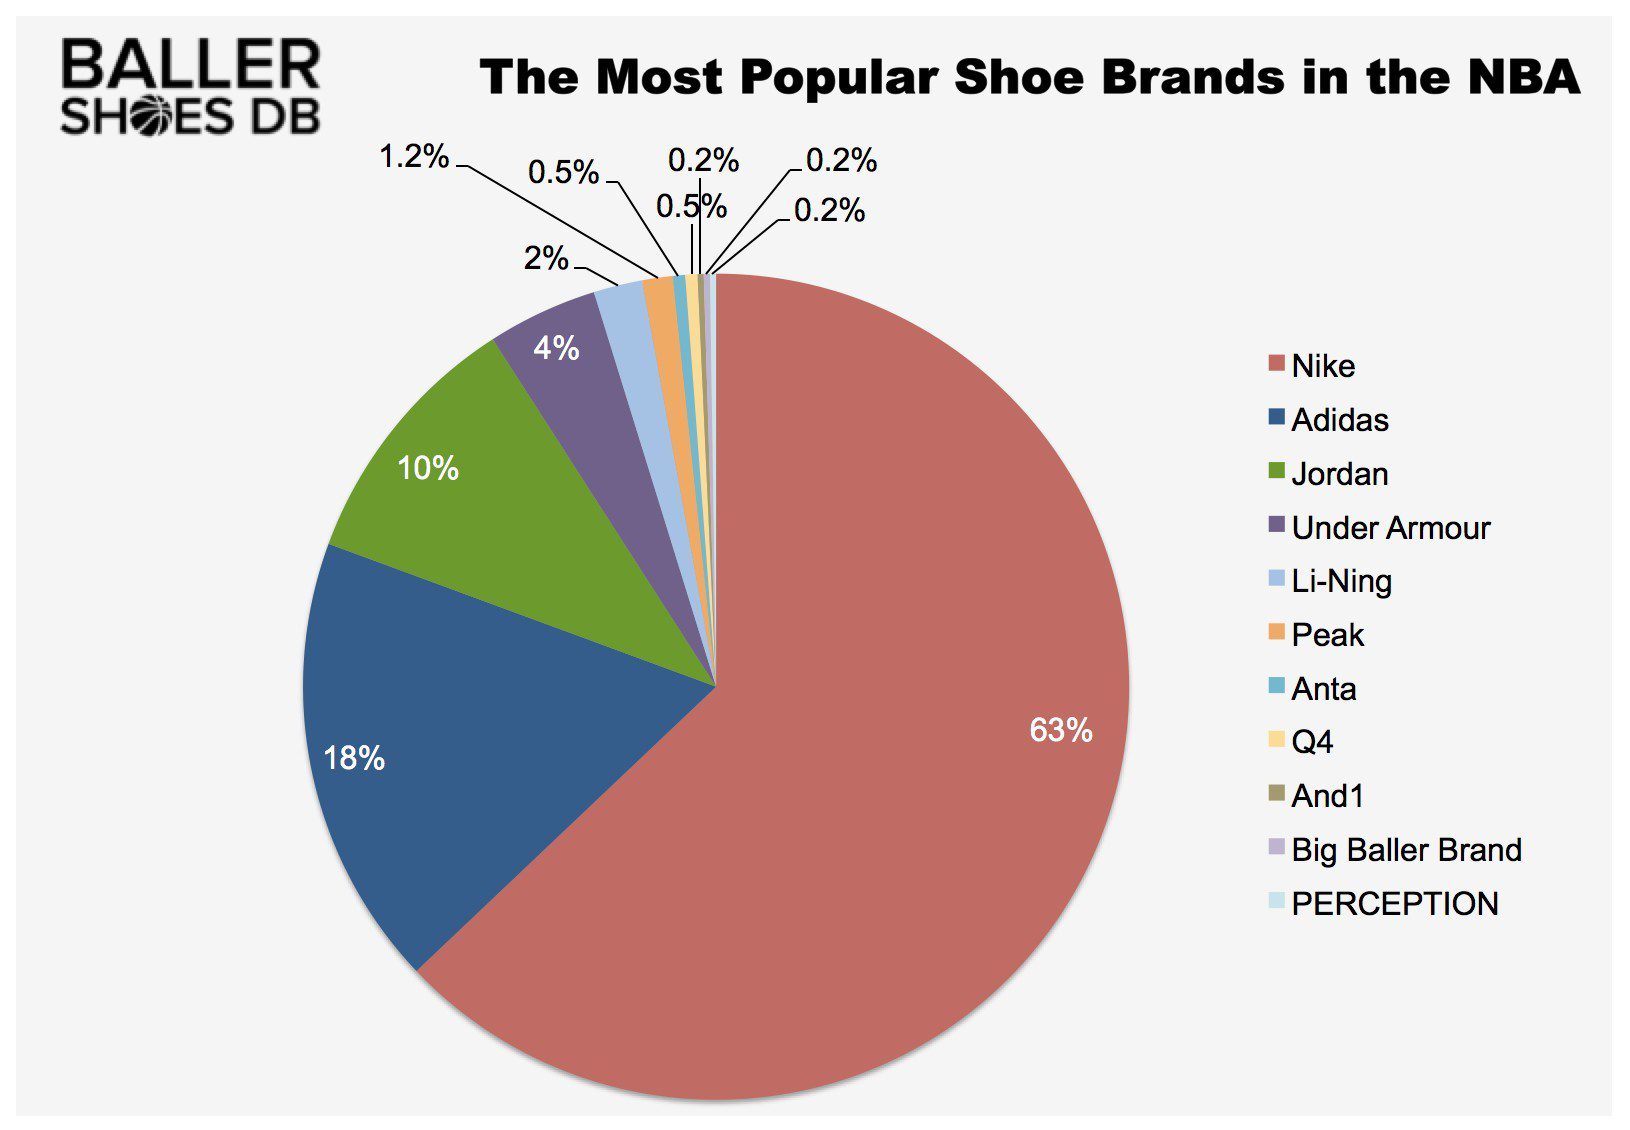 The Most Popular Shoe Brands in the NBA - 2018